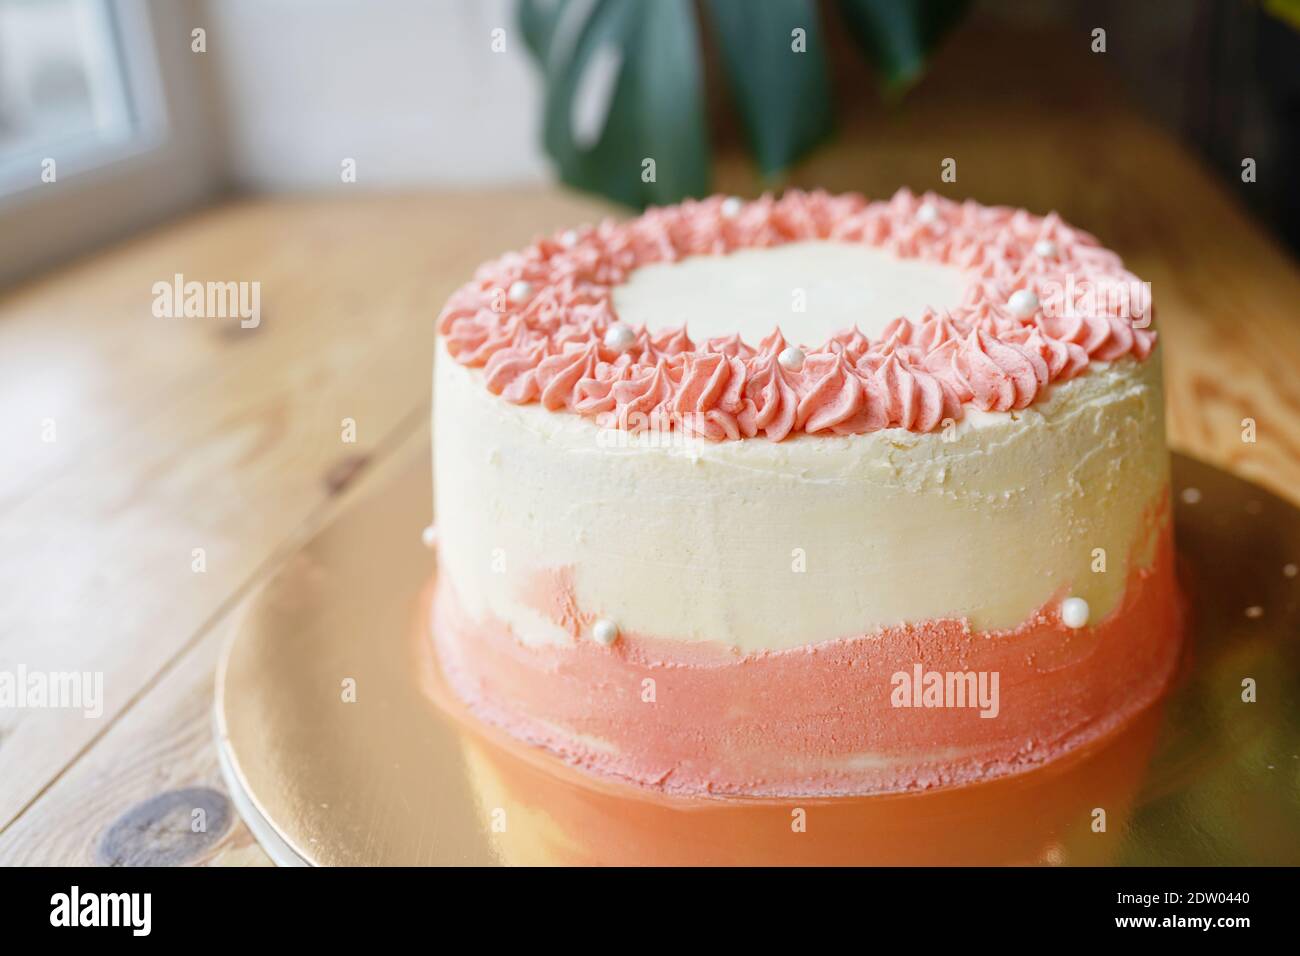 Simple white and pink color wedding or birthday cake Stock Photo ...